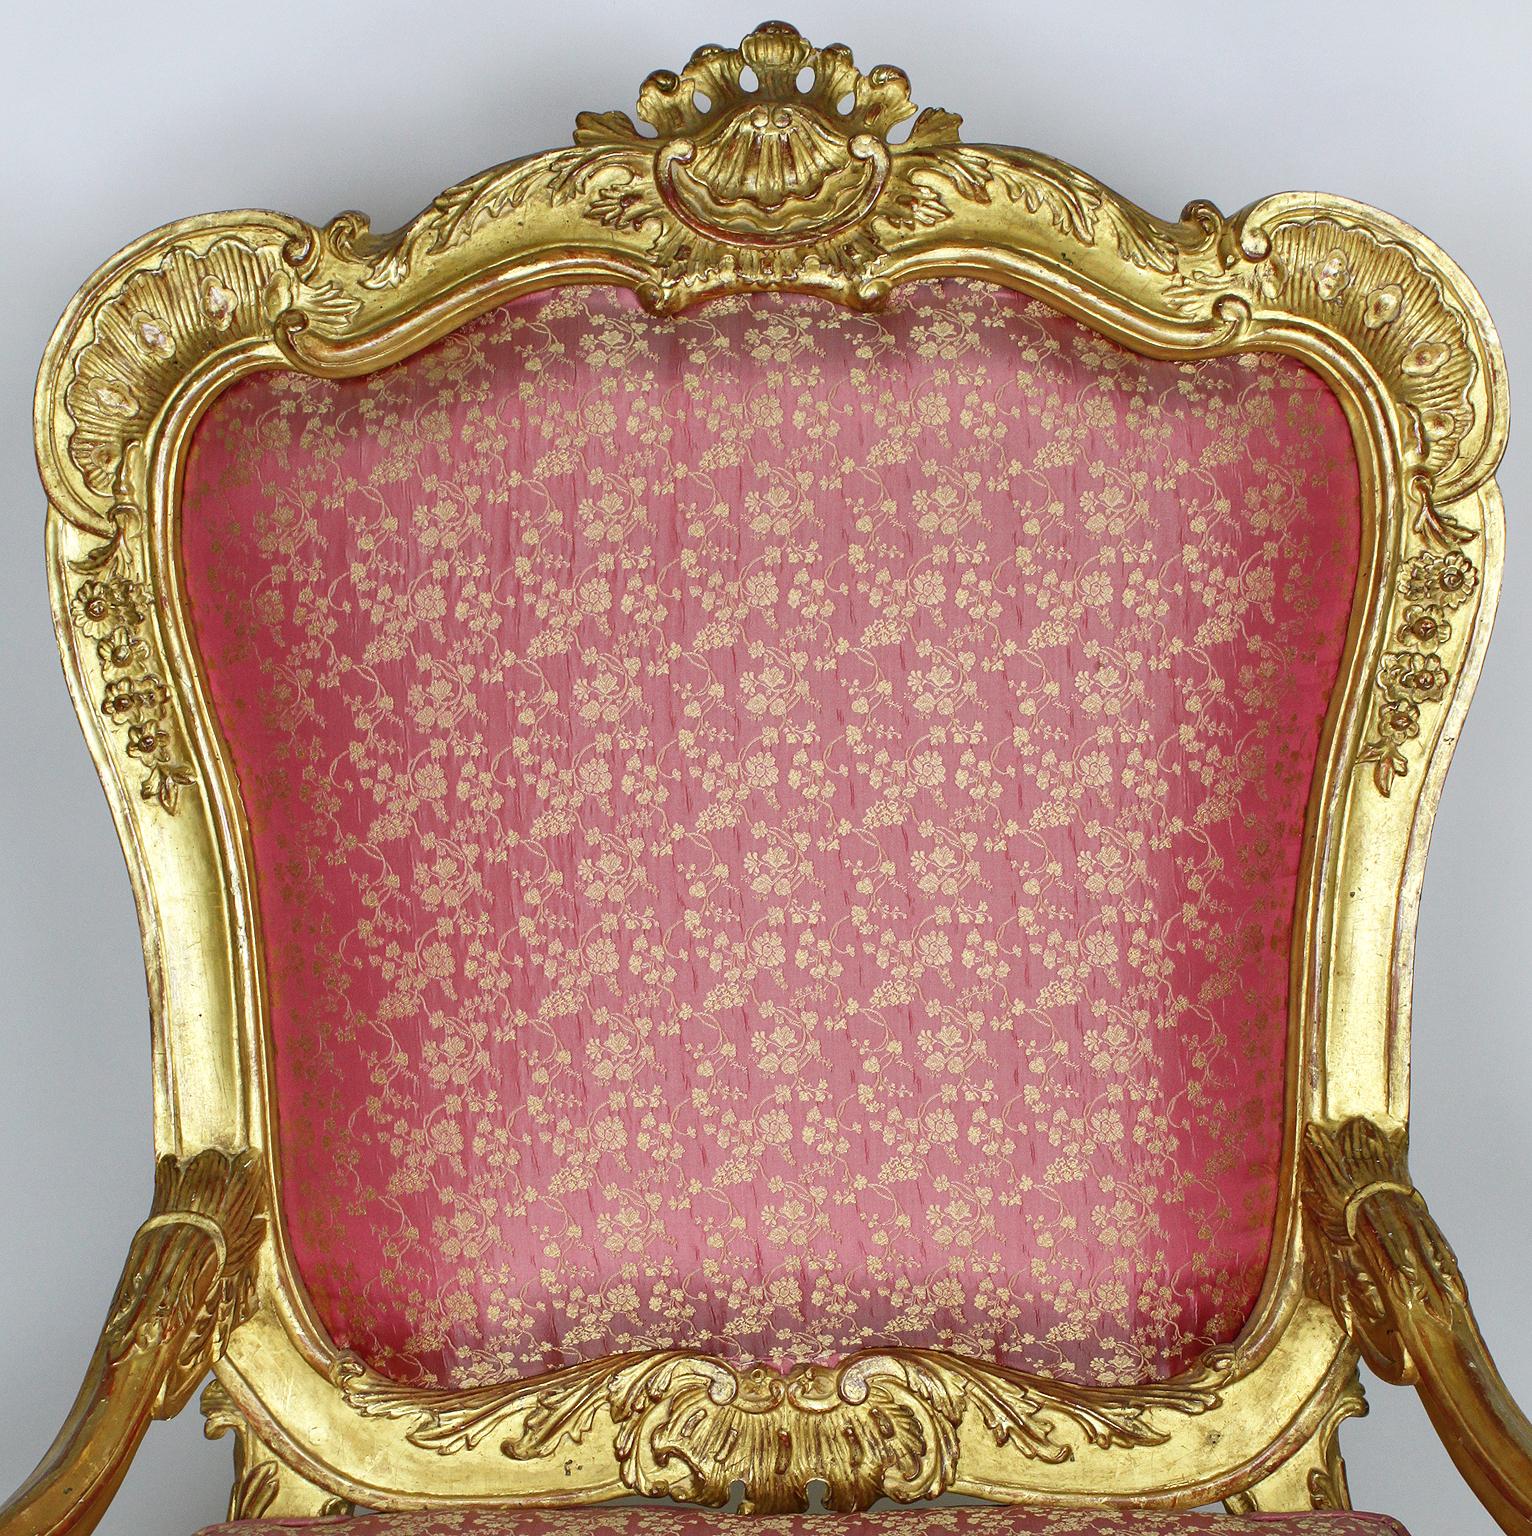 Fabric Pair of Italian Venetian Rococo Revival Style Giltwood Carved Throne Armchairs For Sale